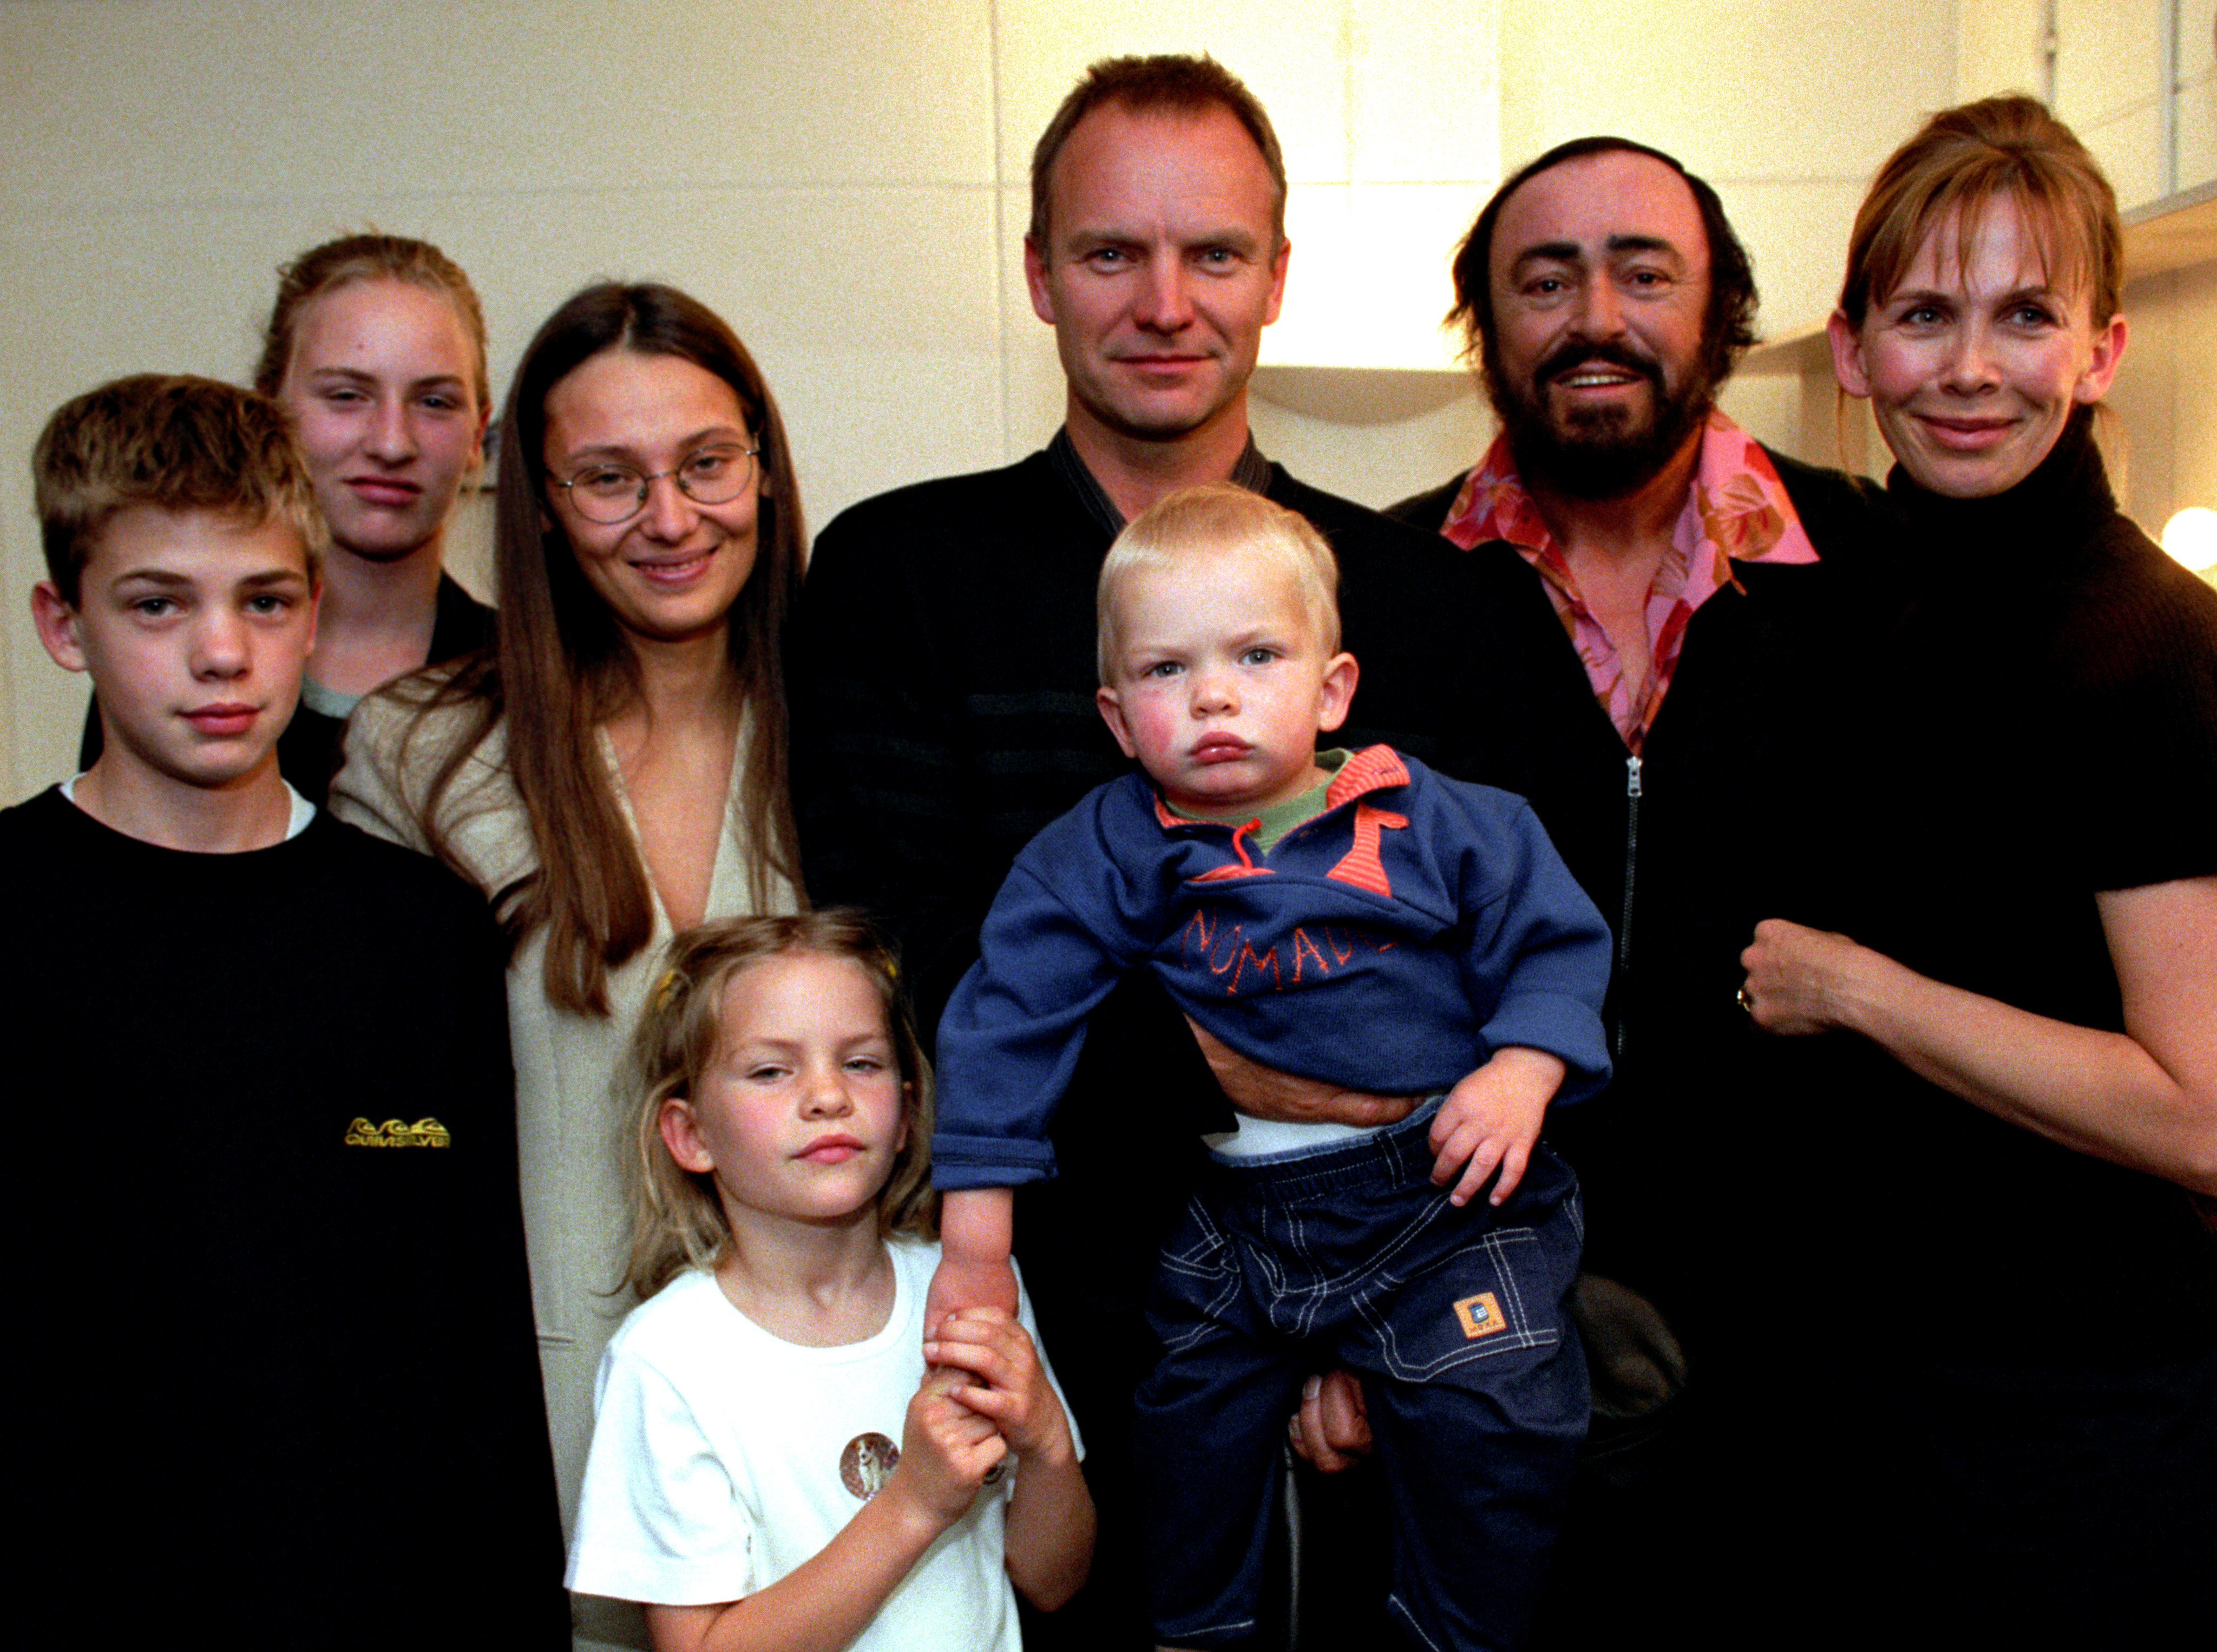 Pavarotti and his girfriend Nicoletta (with glasses), pose with Sting (c), and his partner Trudie Styler (r) and their children on August 16, 2017. | Source: Getty Images